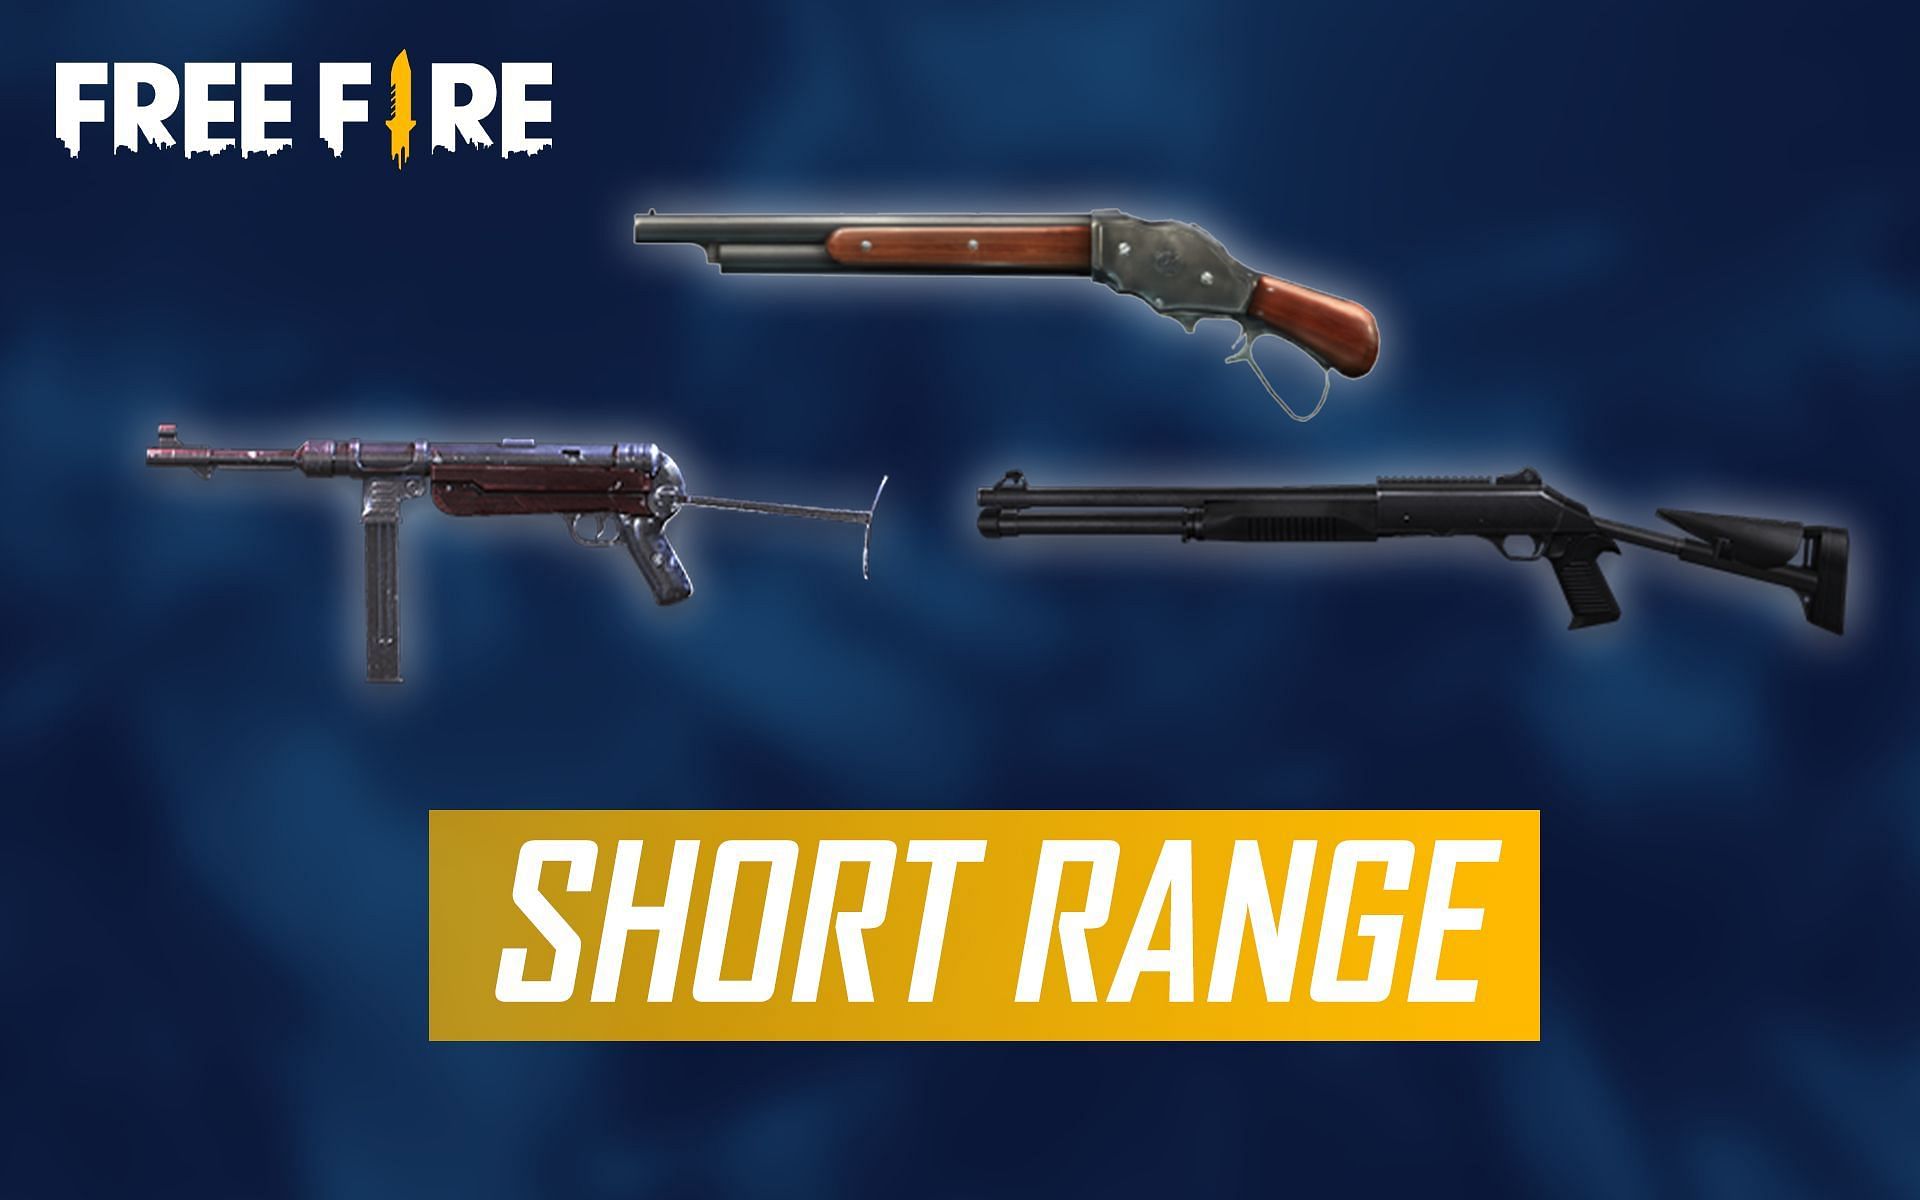 There are several SMGs and shotguns which can be used (Image via Free Fire)